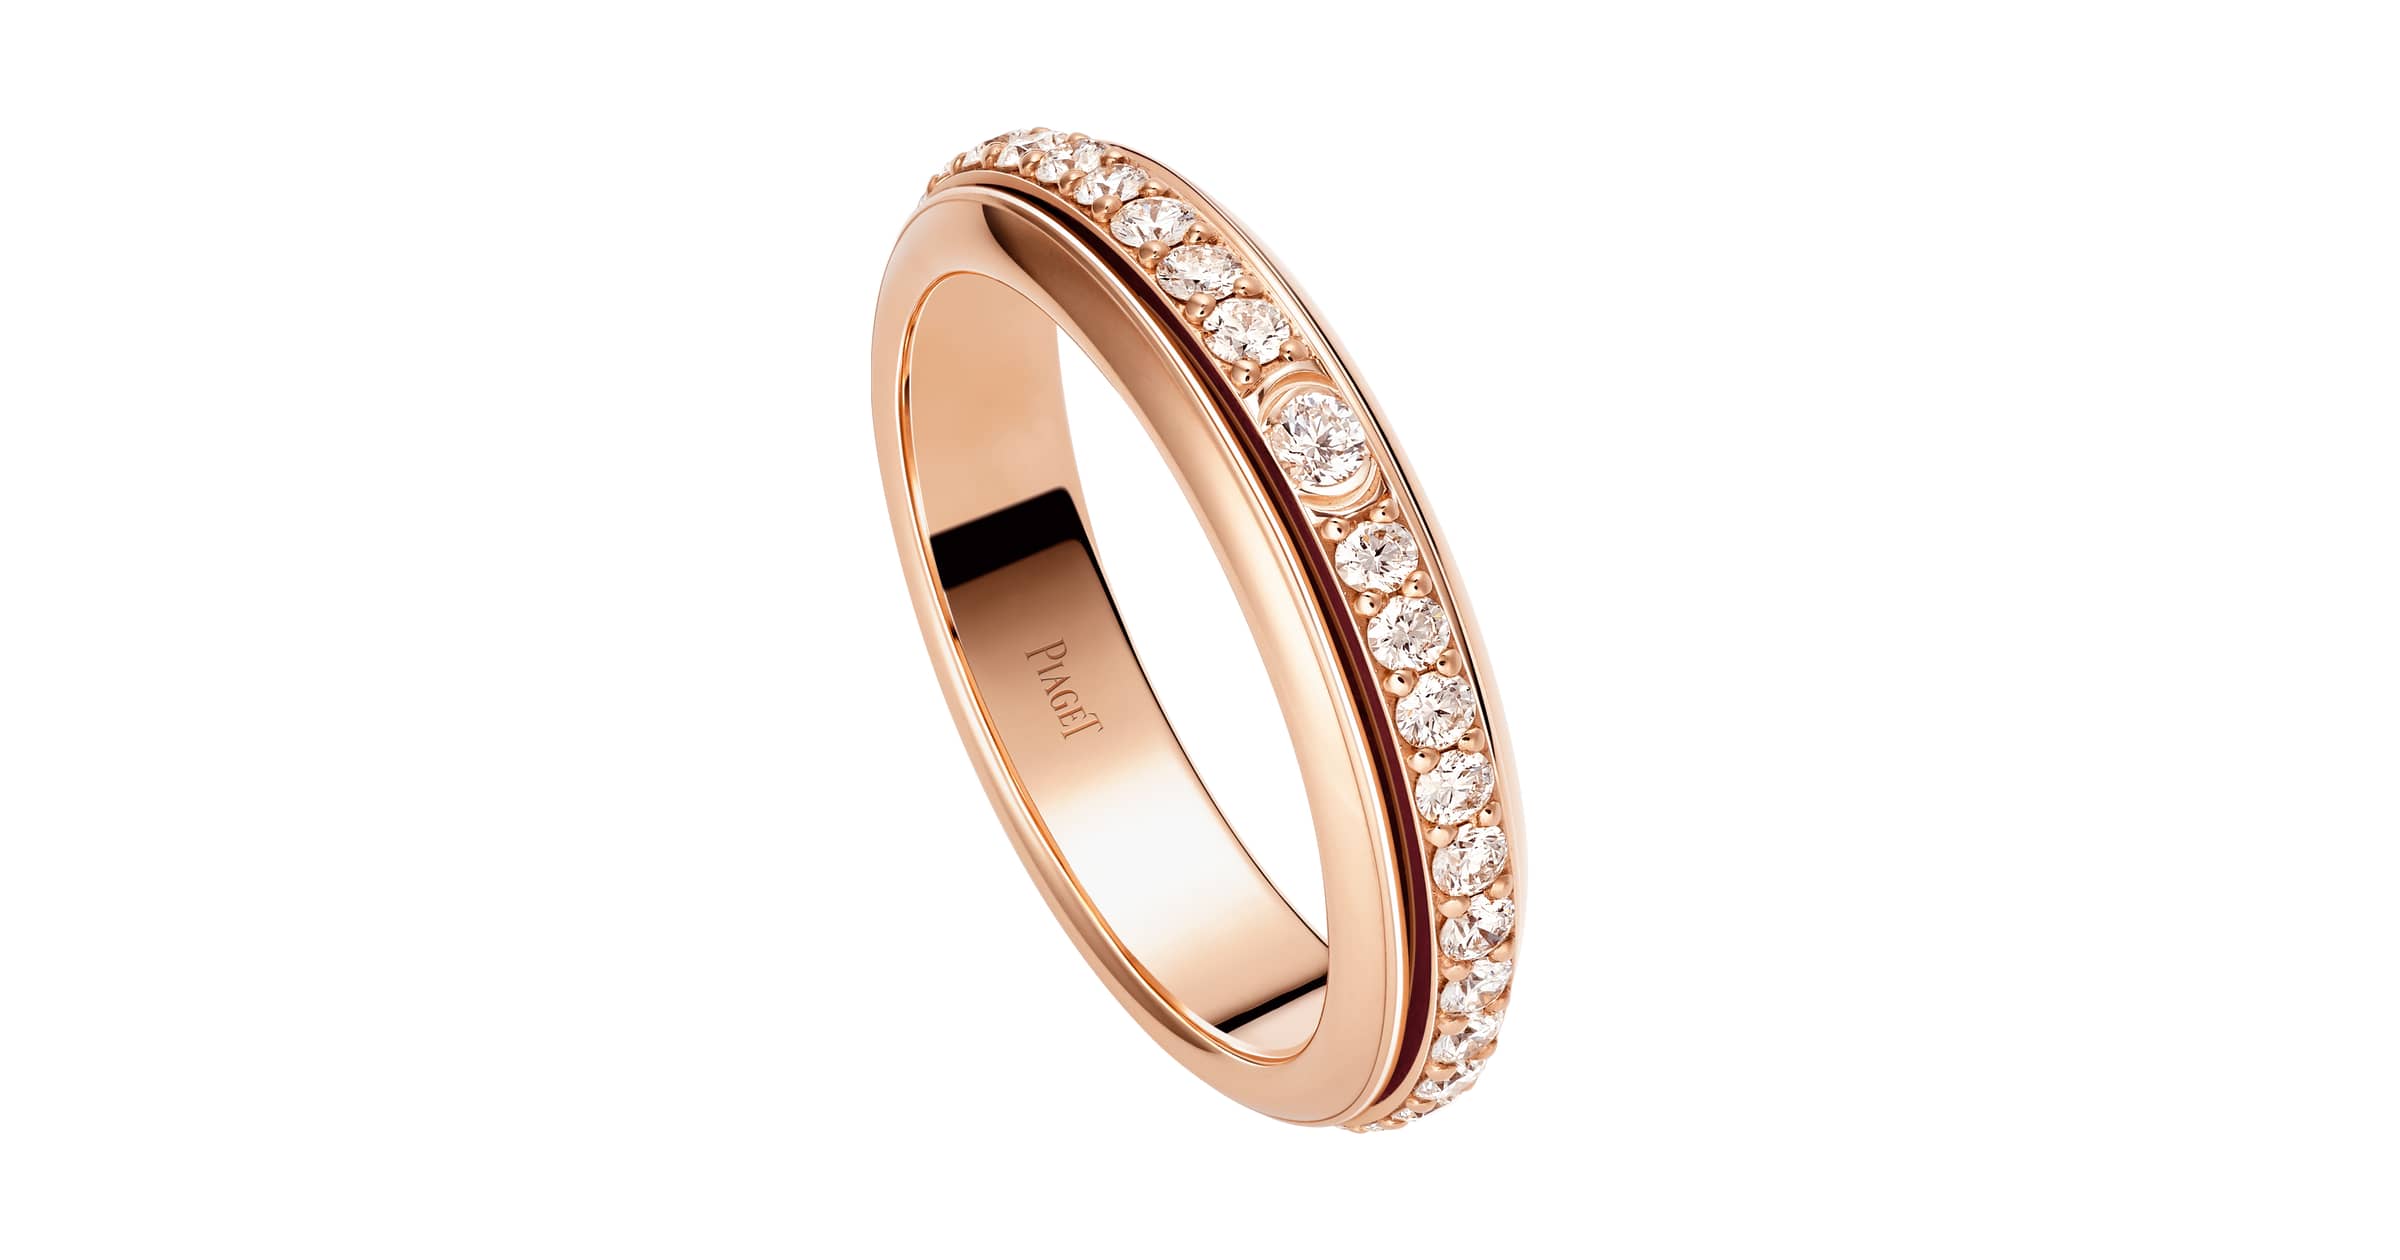 Candere by Kalyan Jewellers Diamond Ring 18kt Yellow Gold ring Price in  India - Buy Candere by Kalyan Jewellers Diamond Ring 18kt Yellow Gold ring  online at Flipkart.com